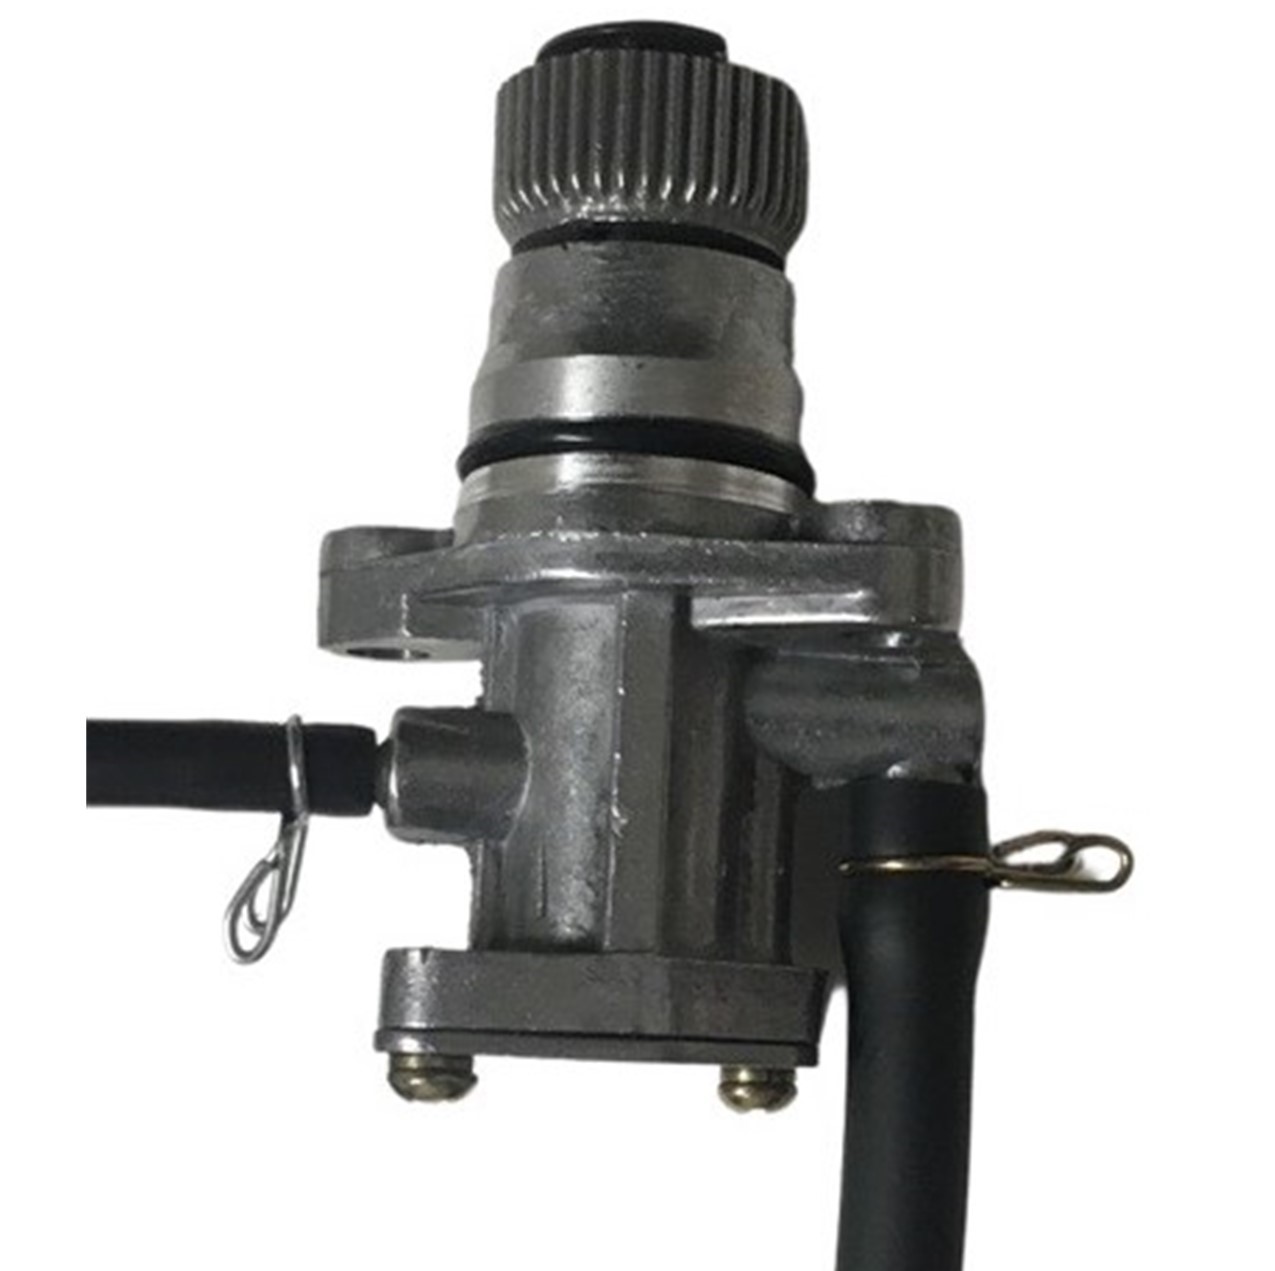 Oil Pump 2 Stroke Non-Cable Operated Fits many 50cc, 70cc & 90cc ATV's and Scooters with the Minarelli Jog Engine